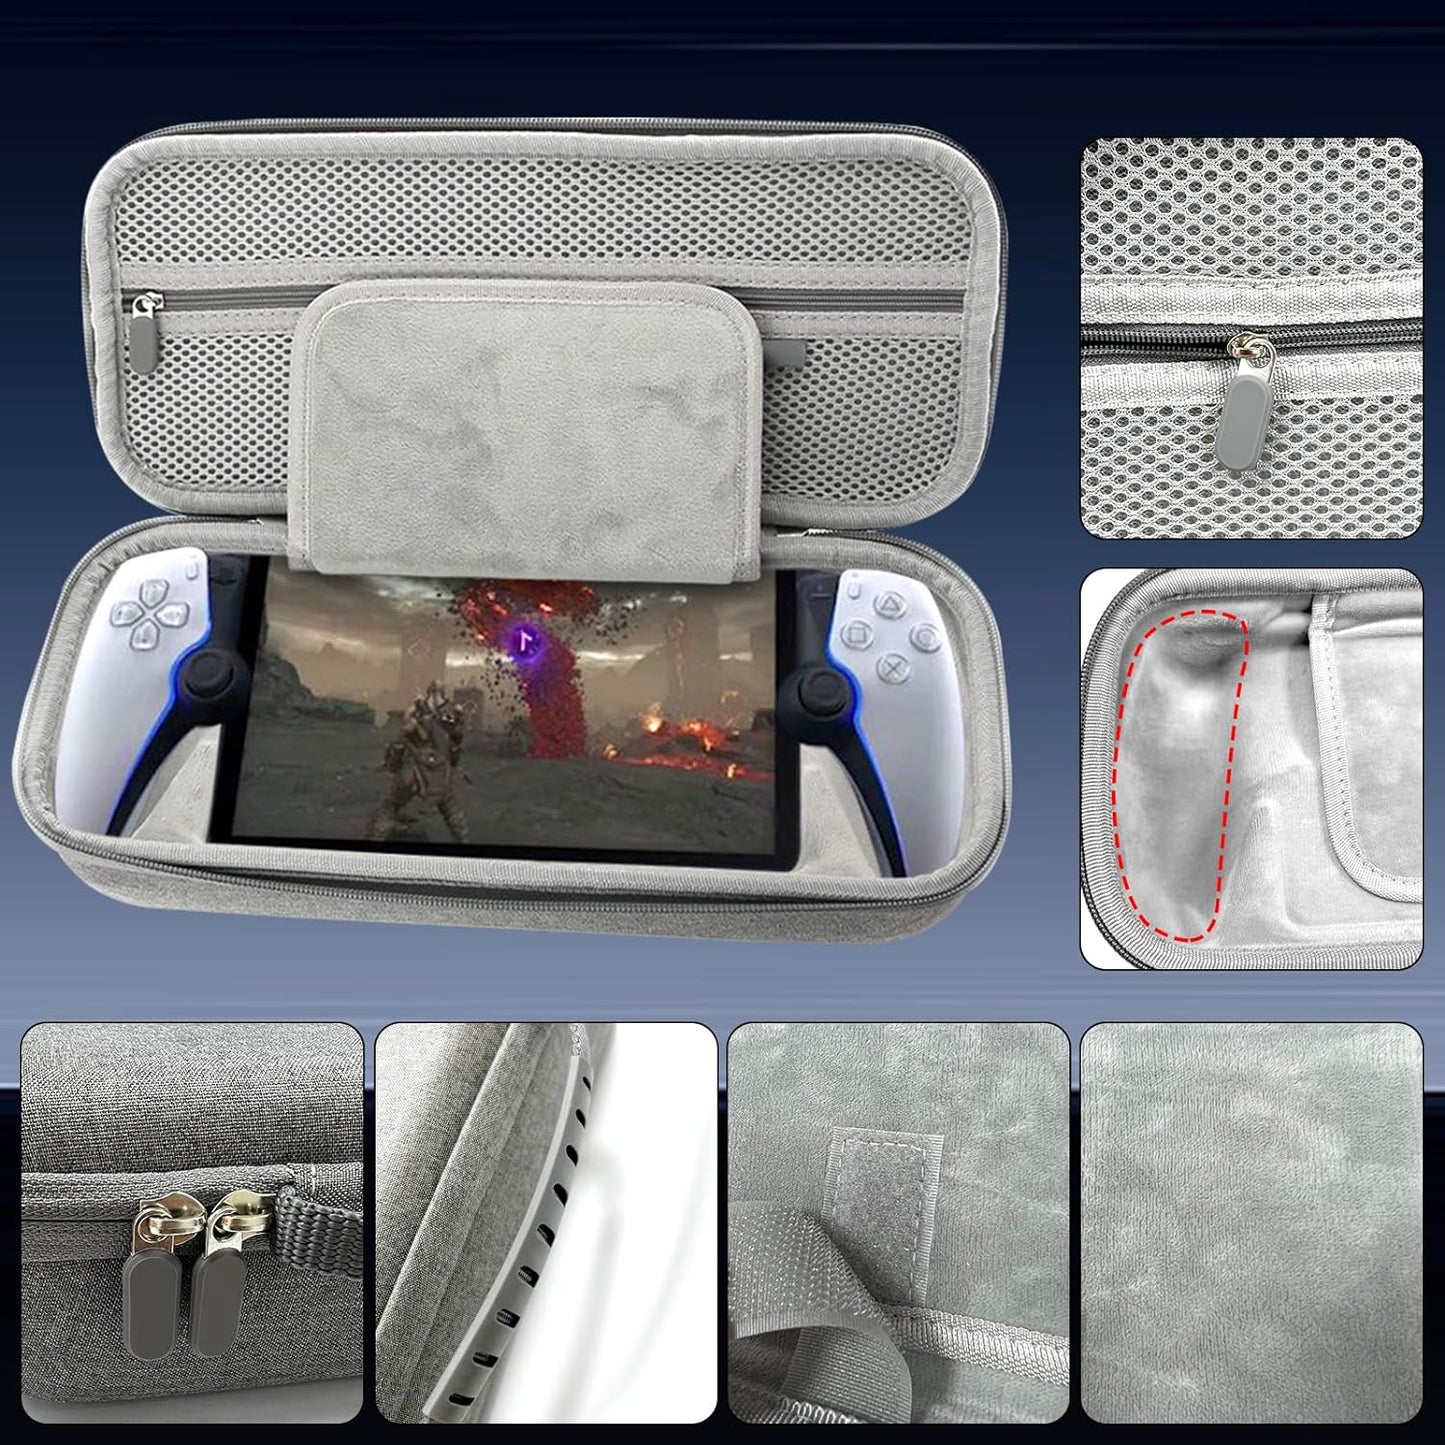 PlayStation Portal Carrying Protective Case - For Storage and Travel